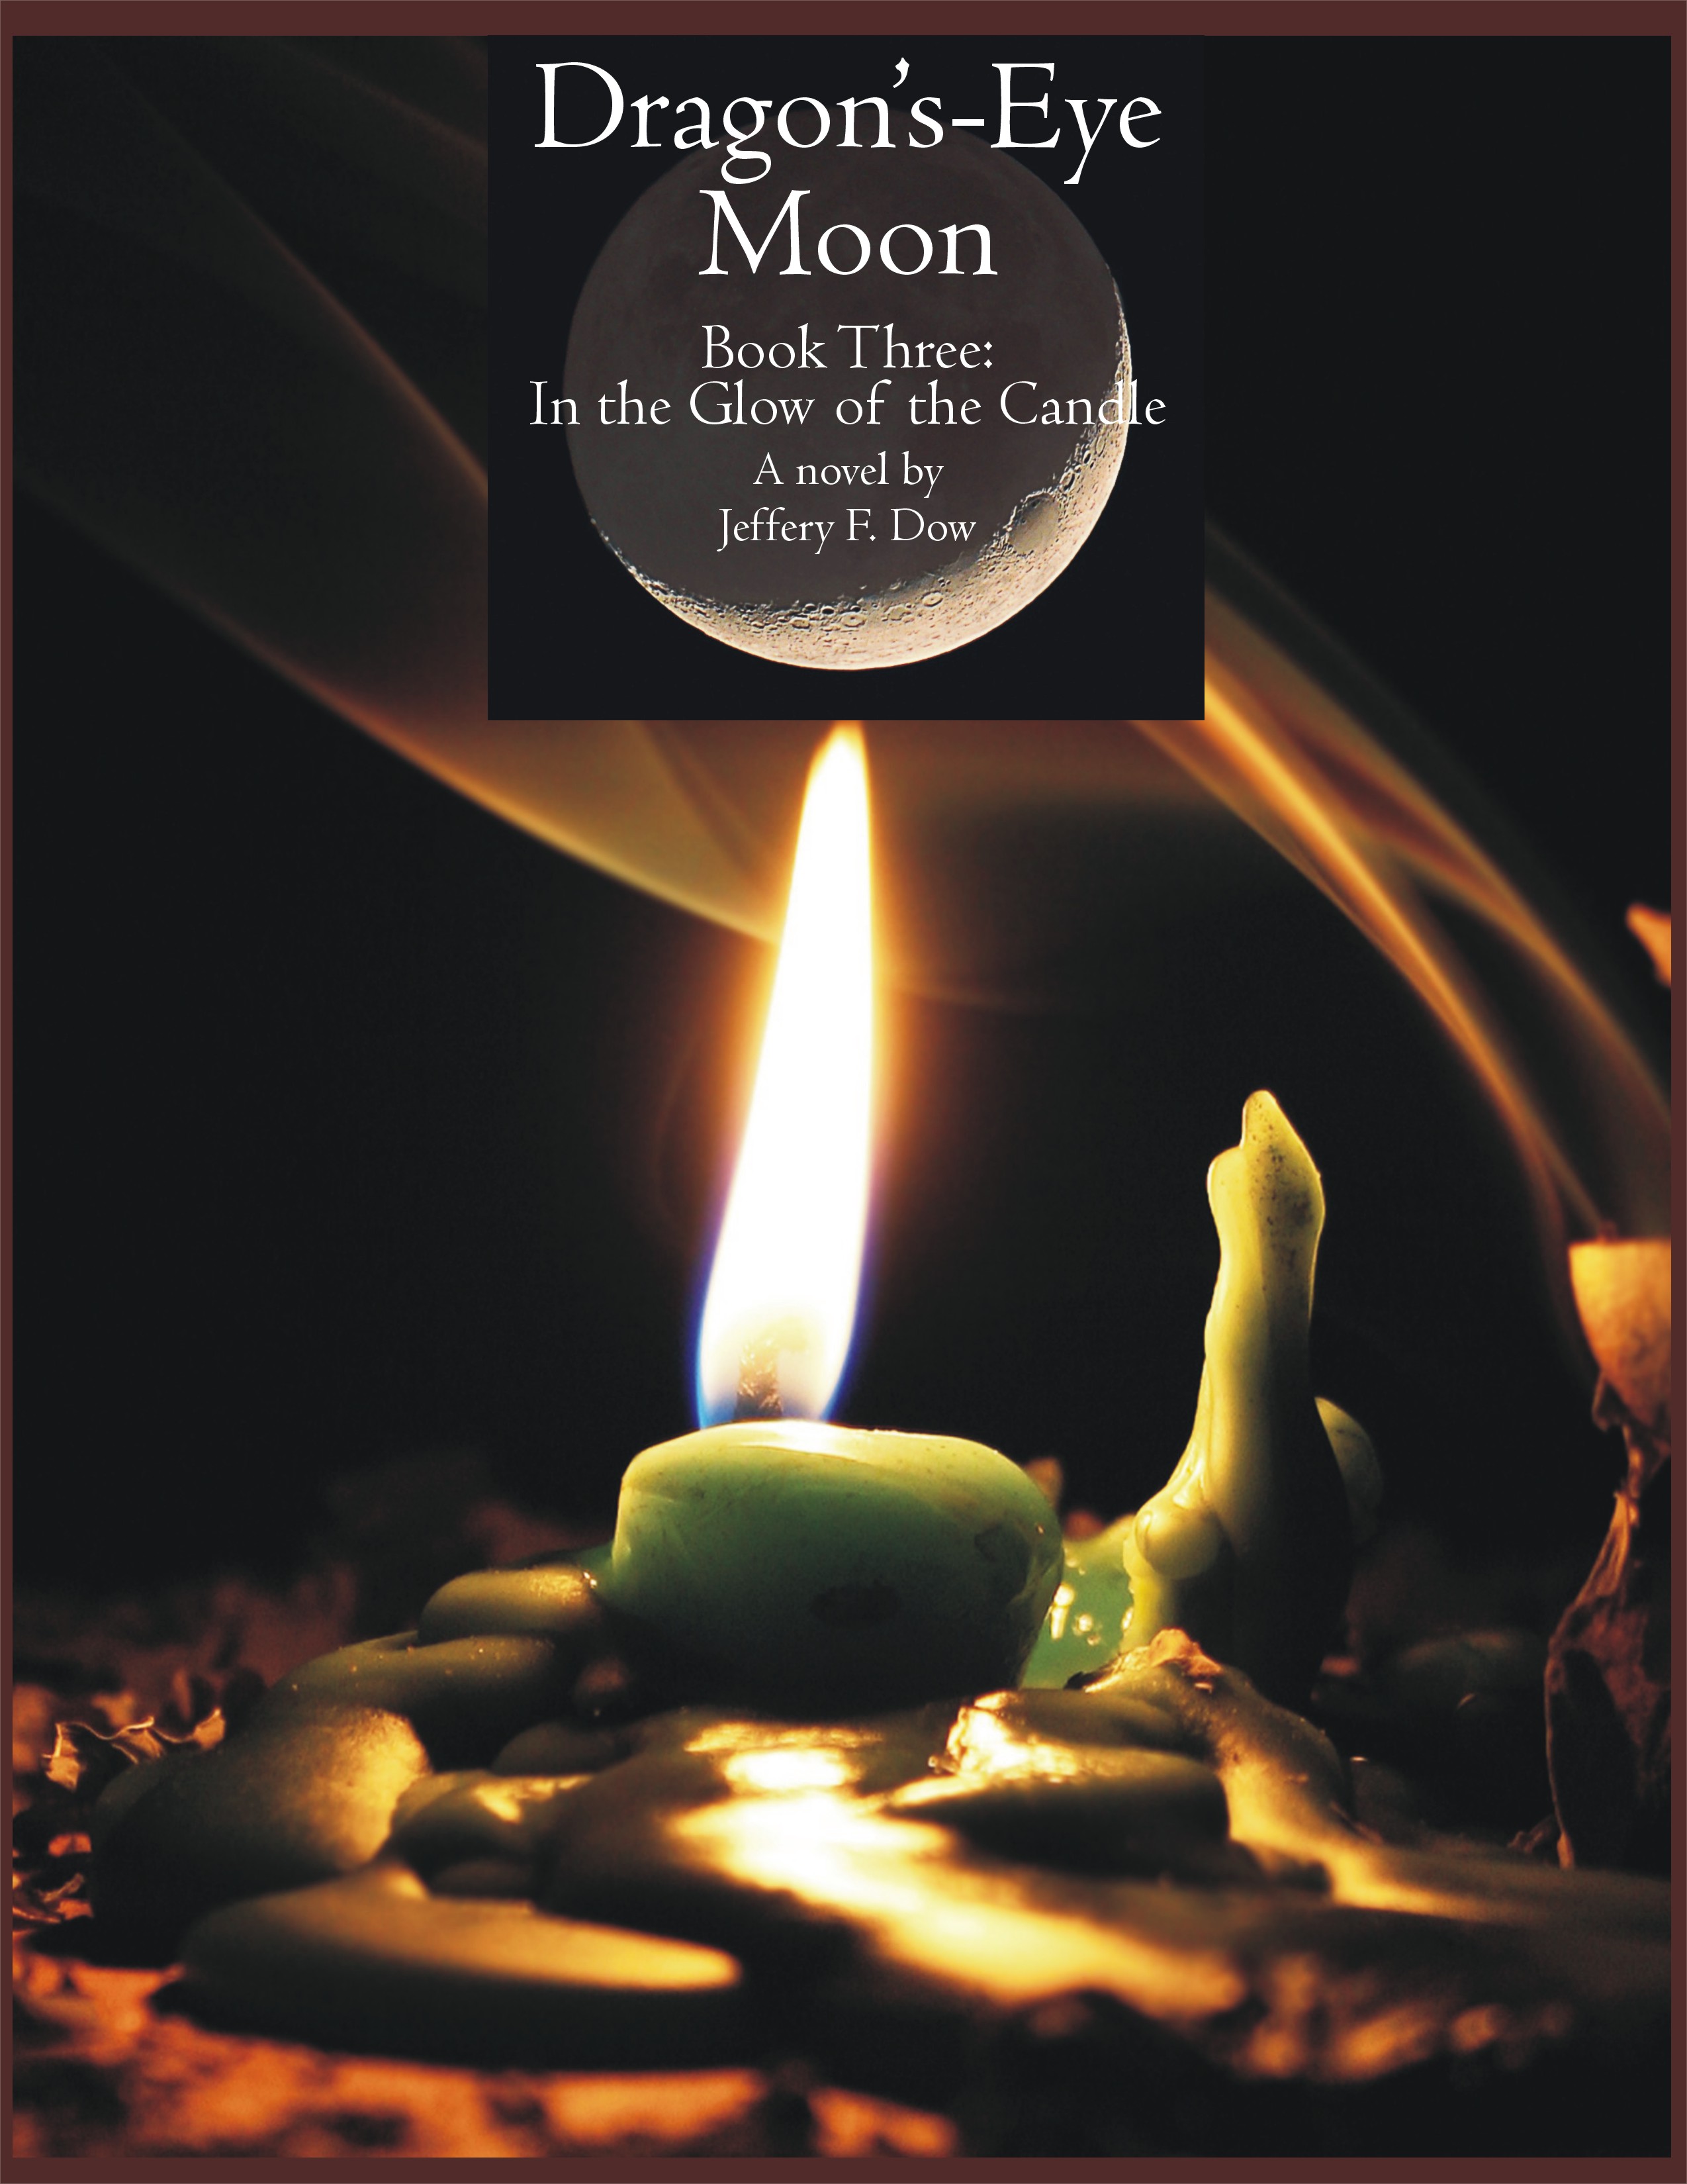 Cover of a book showing a tall flame on a short green candle with smoke in the background